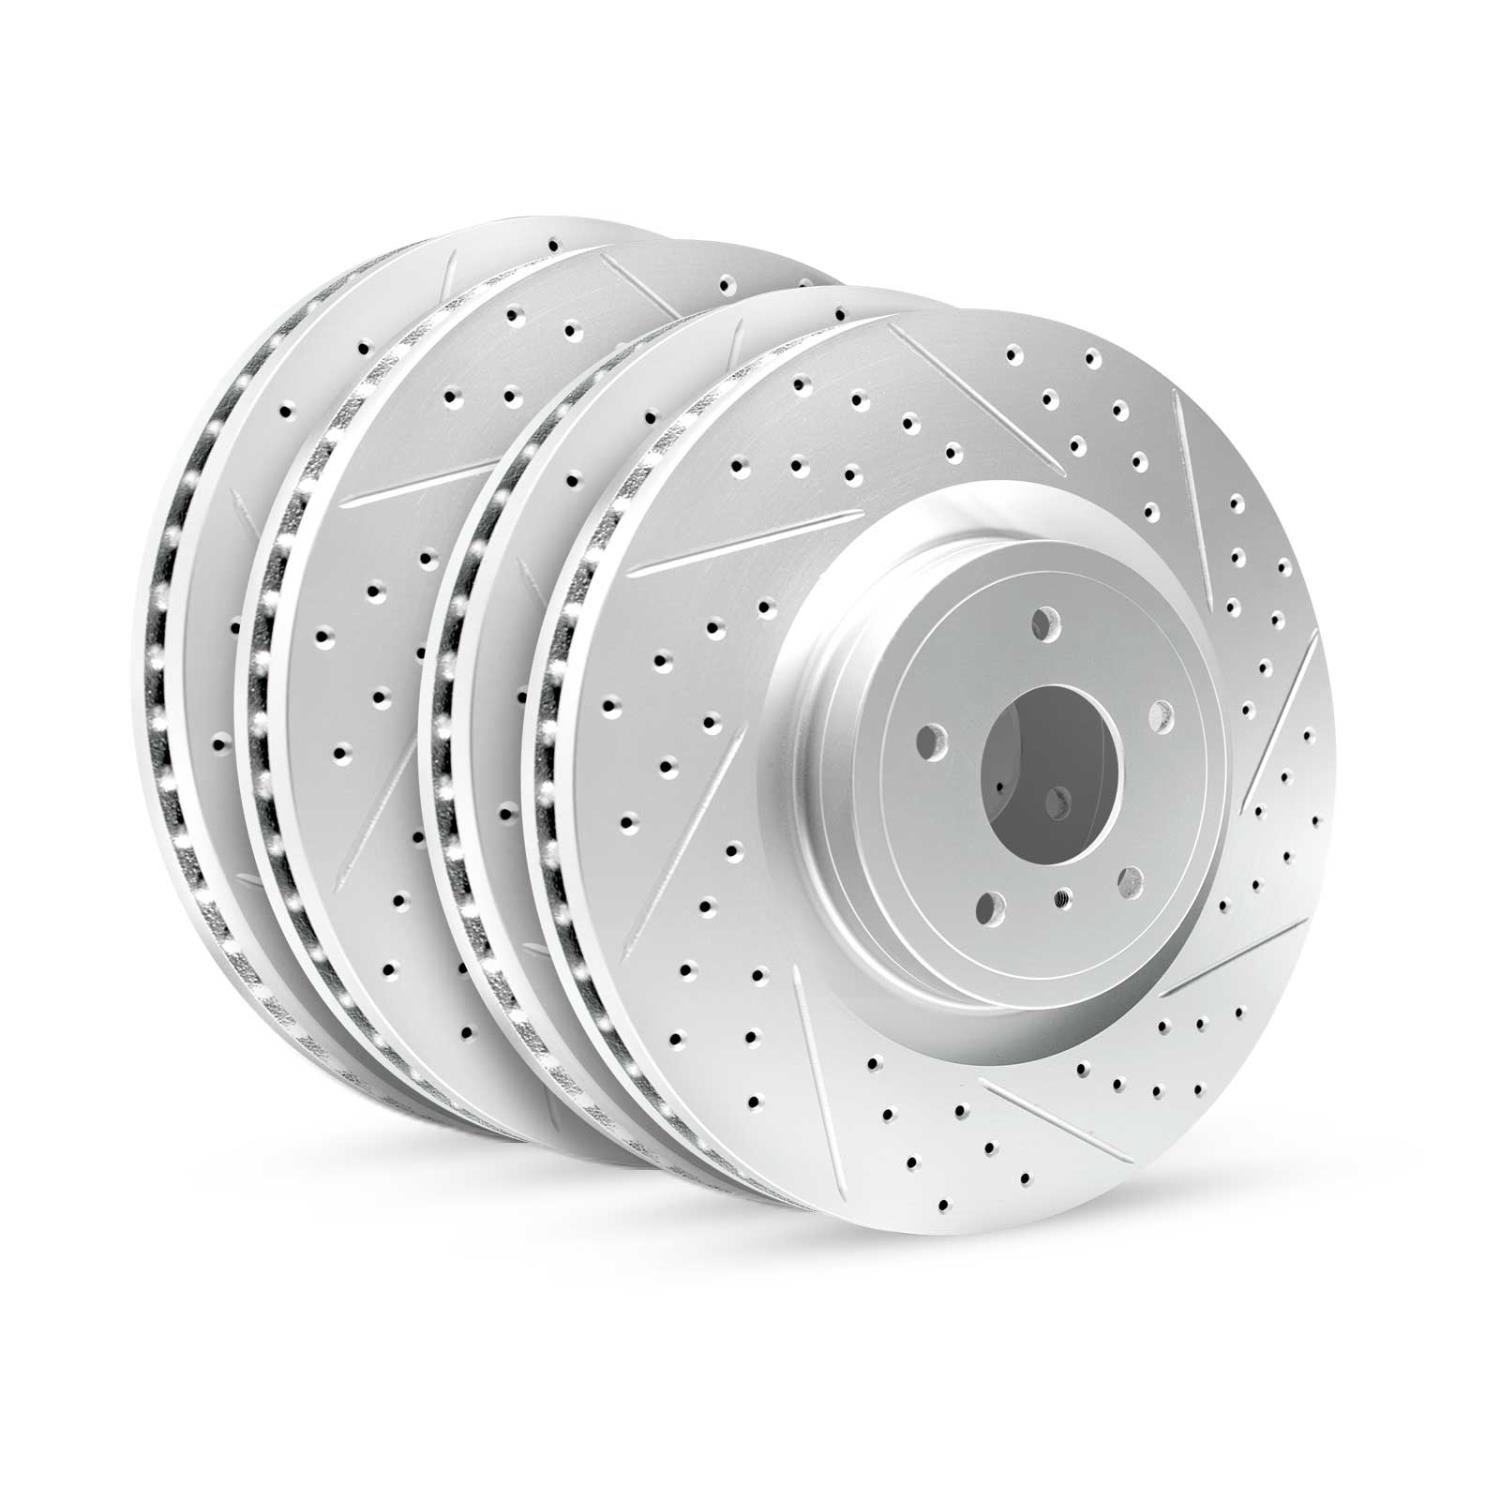 GEO-Carbon Drilled/Slotted Rotors, 2016-2017 Infiniti/Nissan, Position: Front/Rear